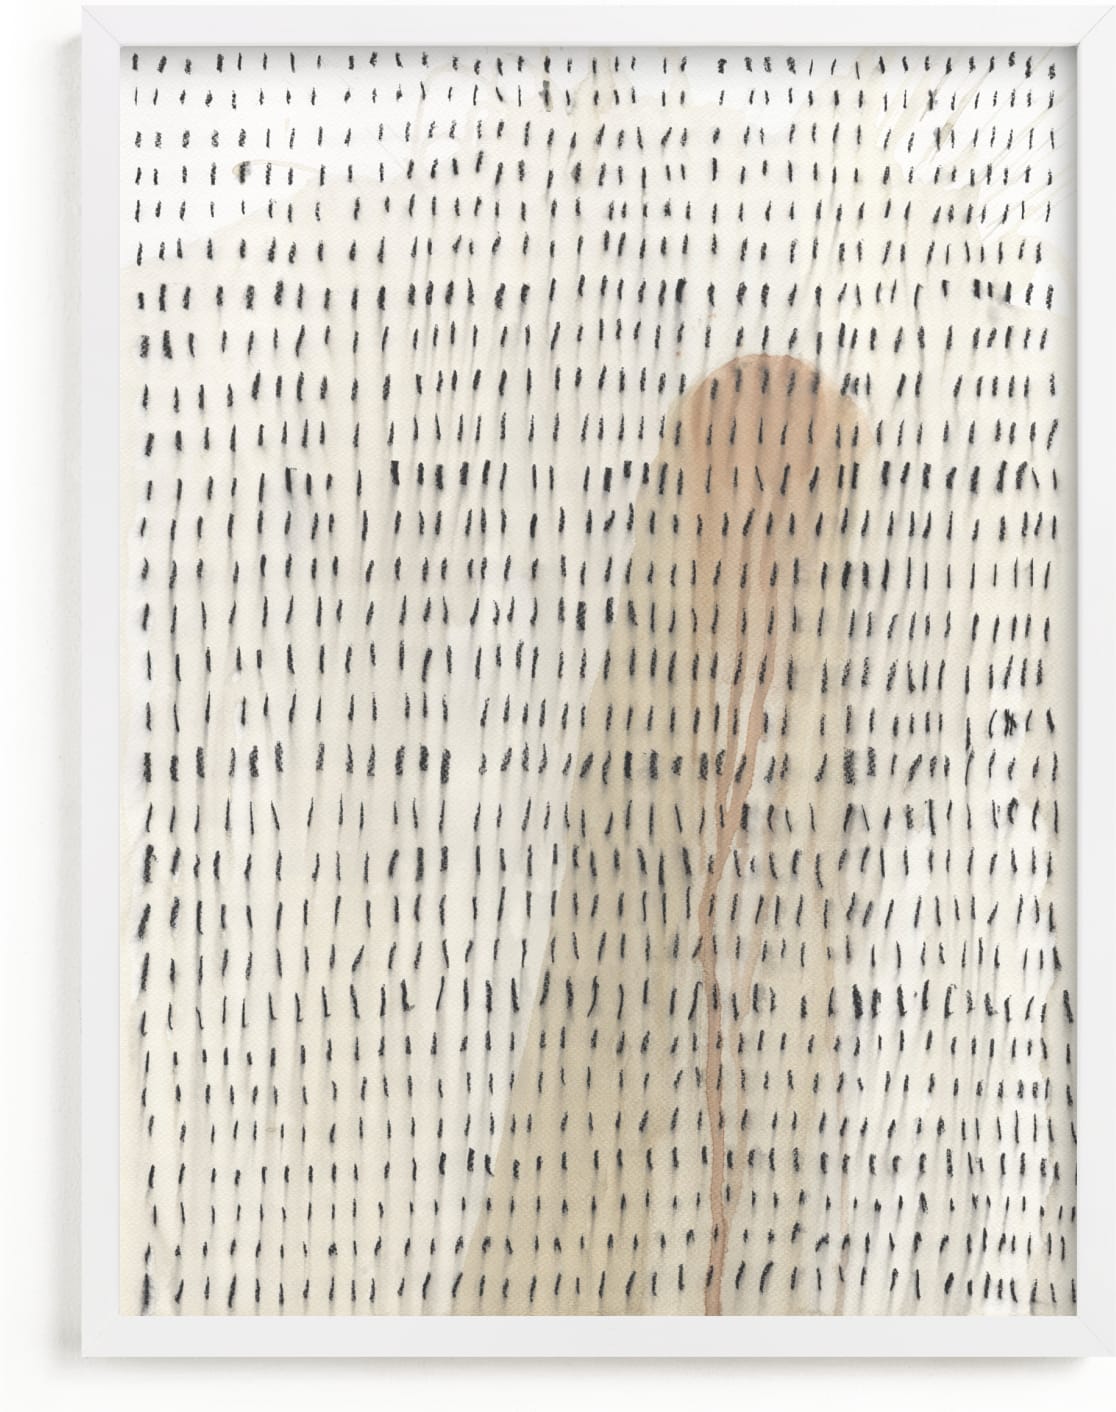 This is a beige art by Luci Power called Rhythm Disrupted.